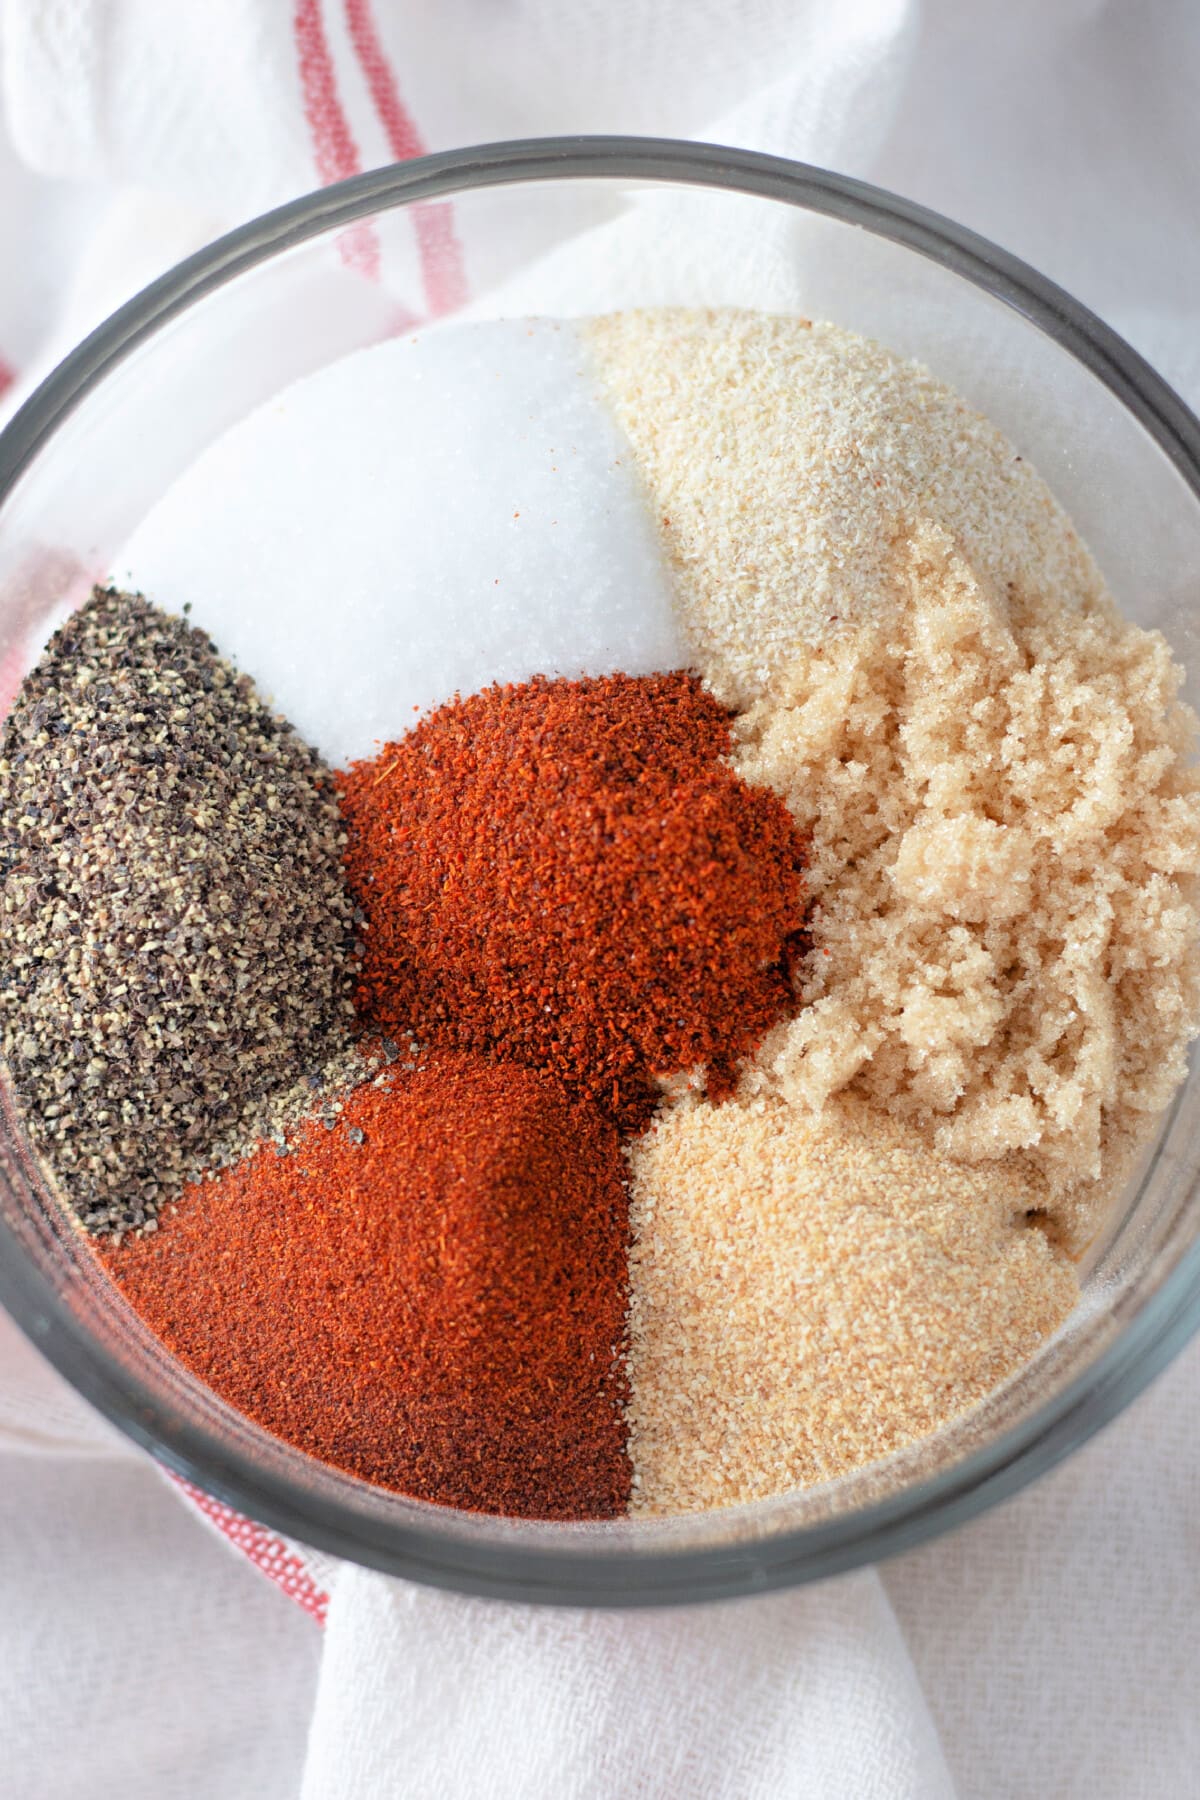 Spices in a glass bowl  